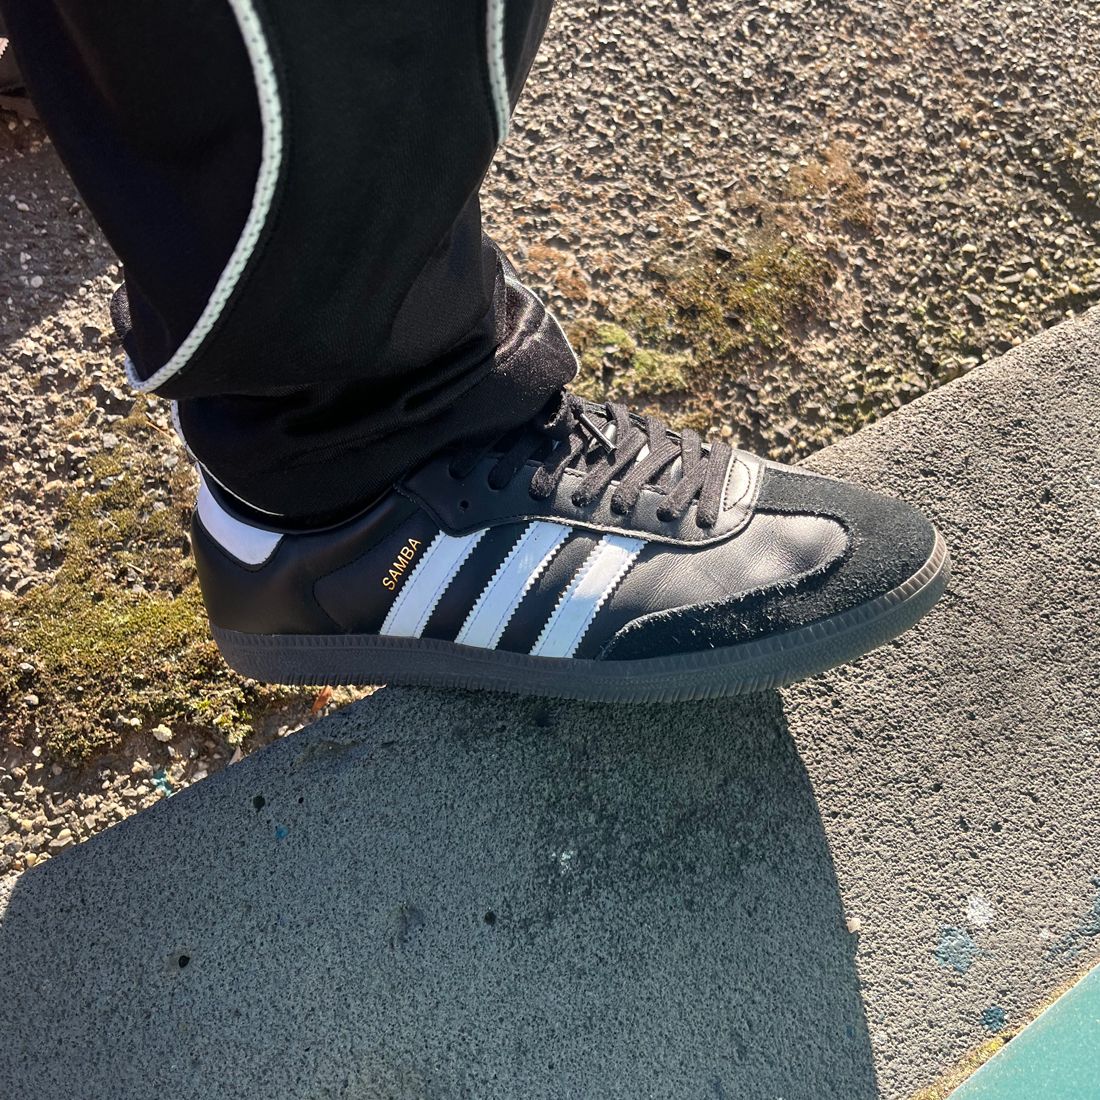 I Wore the adidas Samba for a Month in Search of the Perfect